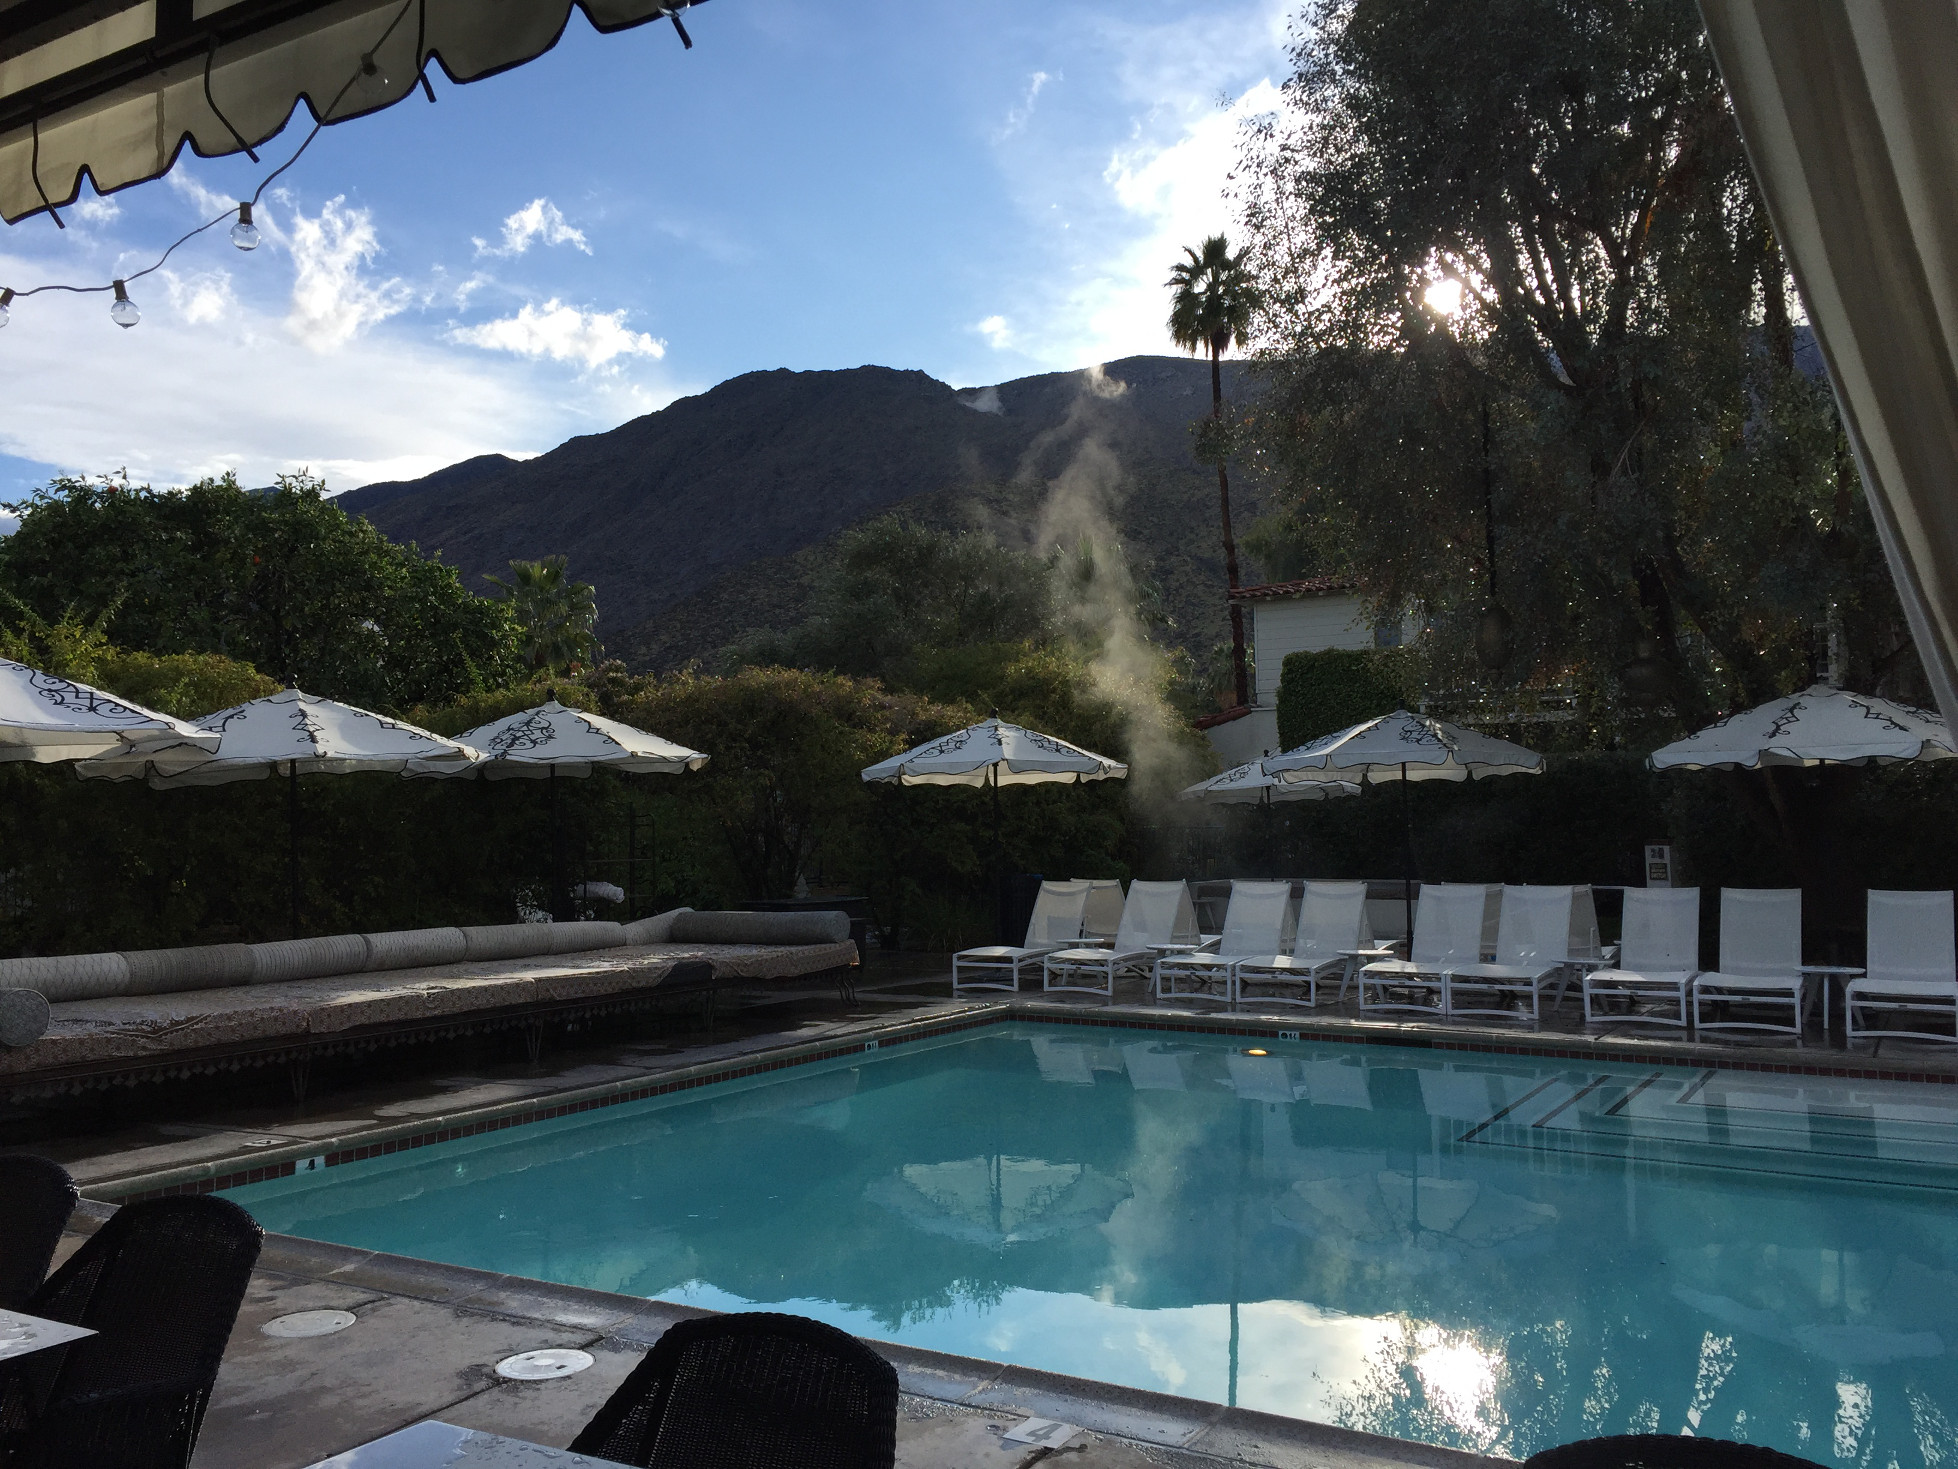 Colony Palms Hotel Pool Palms Springs California Those Someday Goals